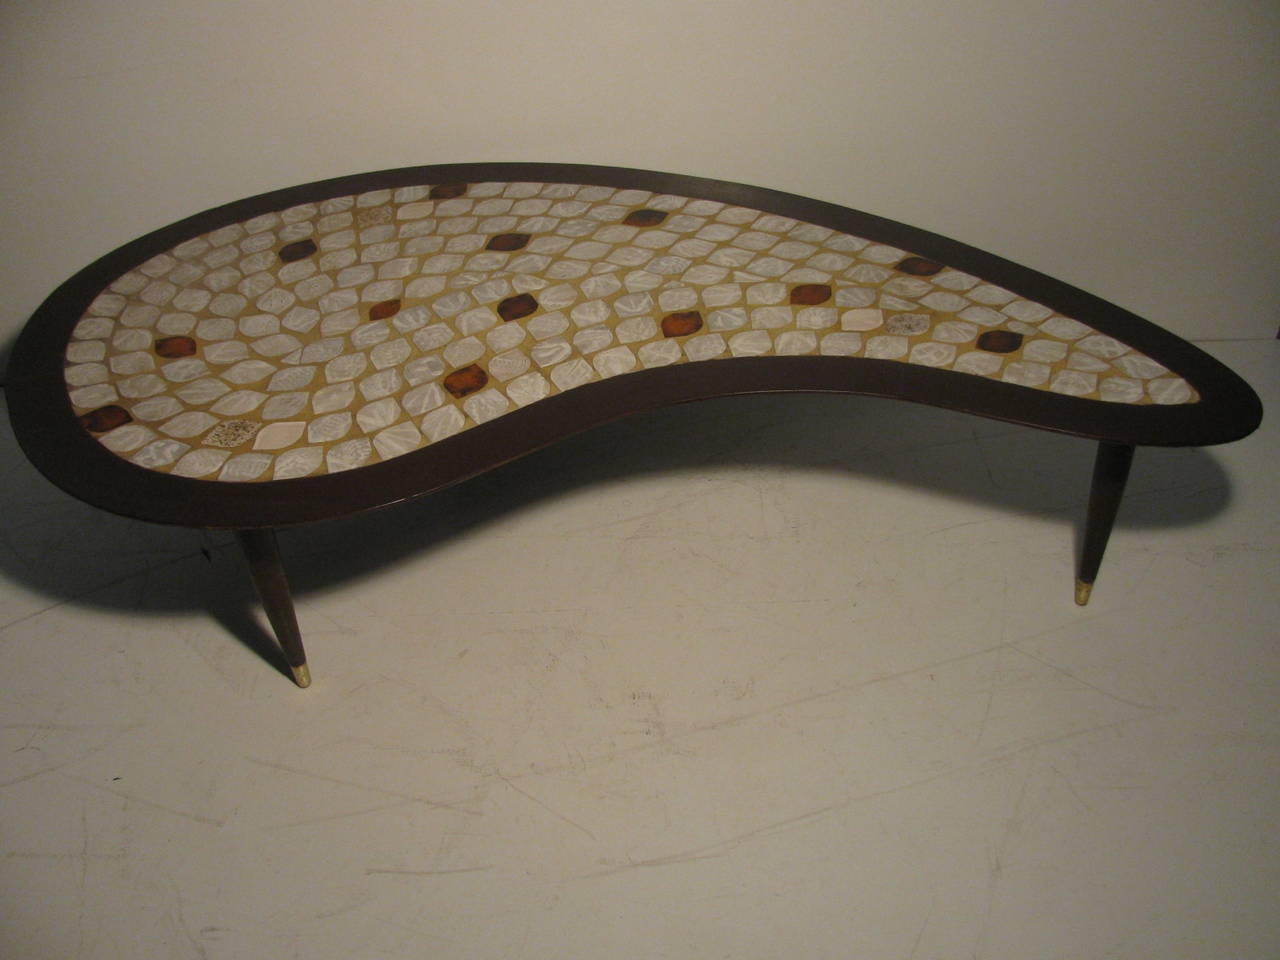 Walnut Mid-Century Modern Kidney Shaped Tile Top Cocktail Table by Hohenberg